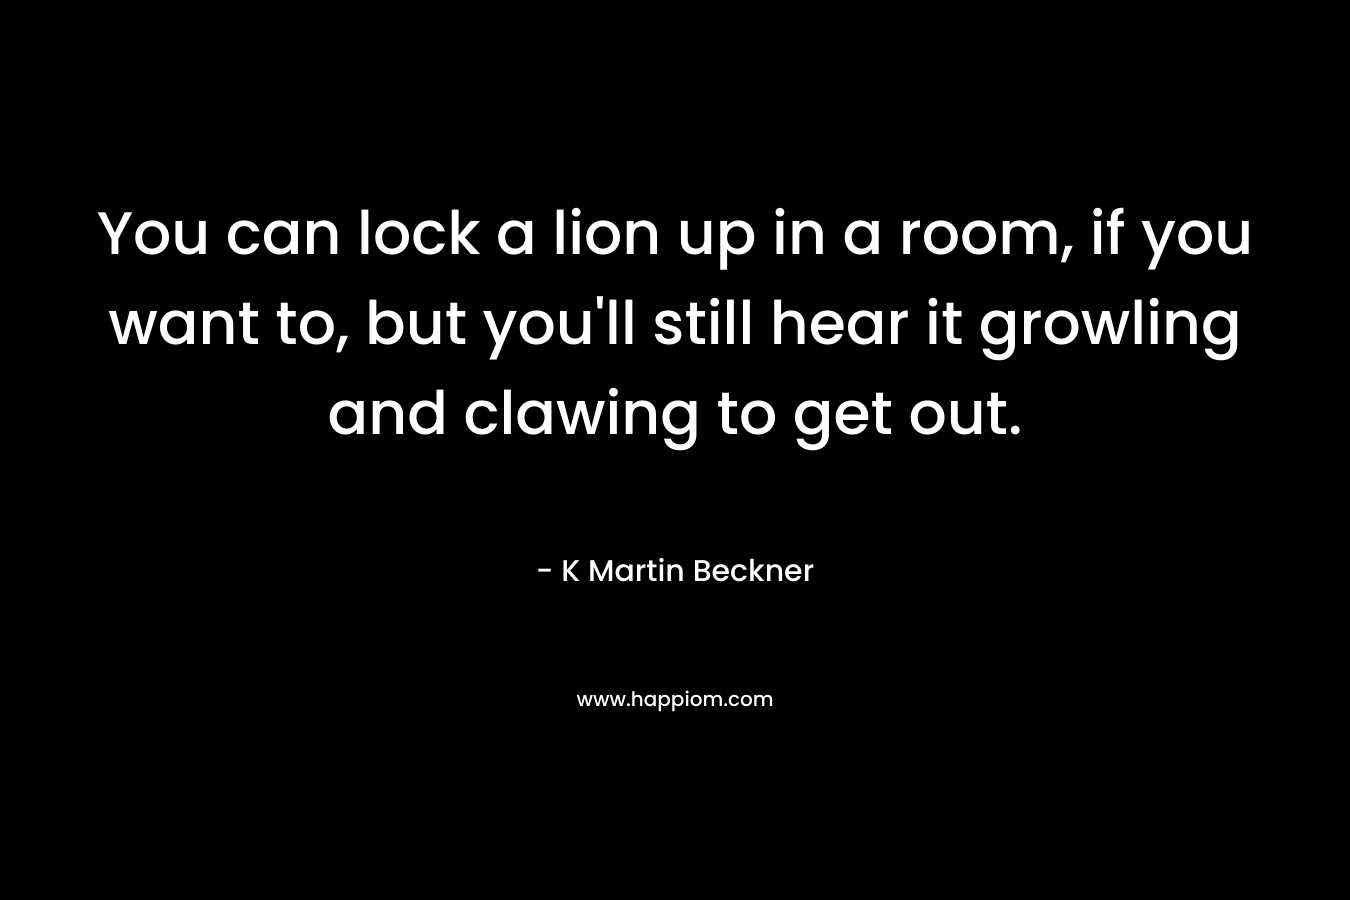 You can lock a lion up in a room, if you want to, but you’ll still hear it growling and clawing to get out. – K Martin Beckner